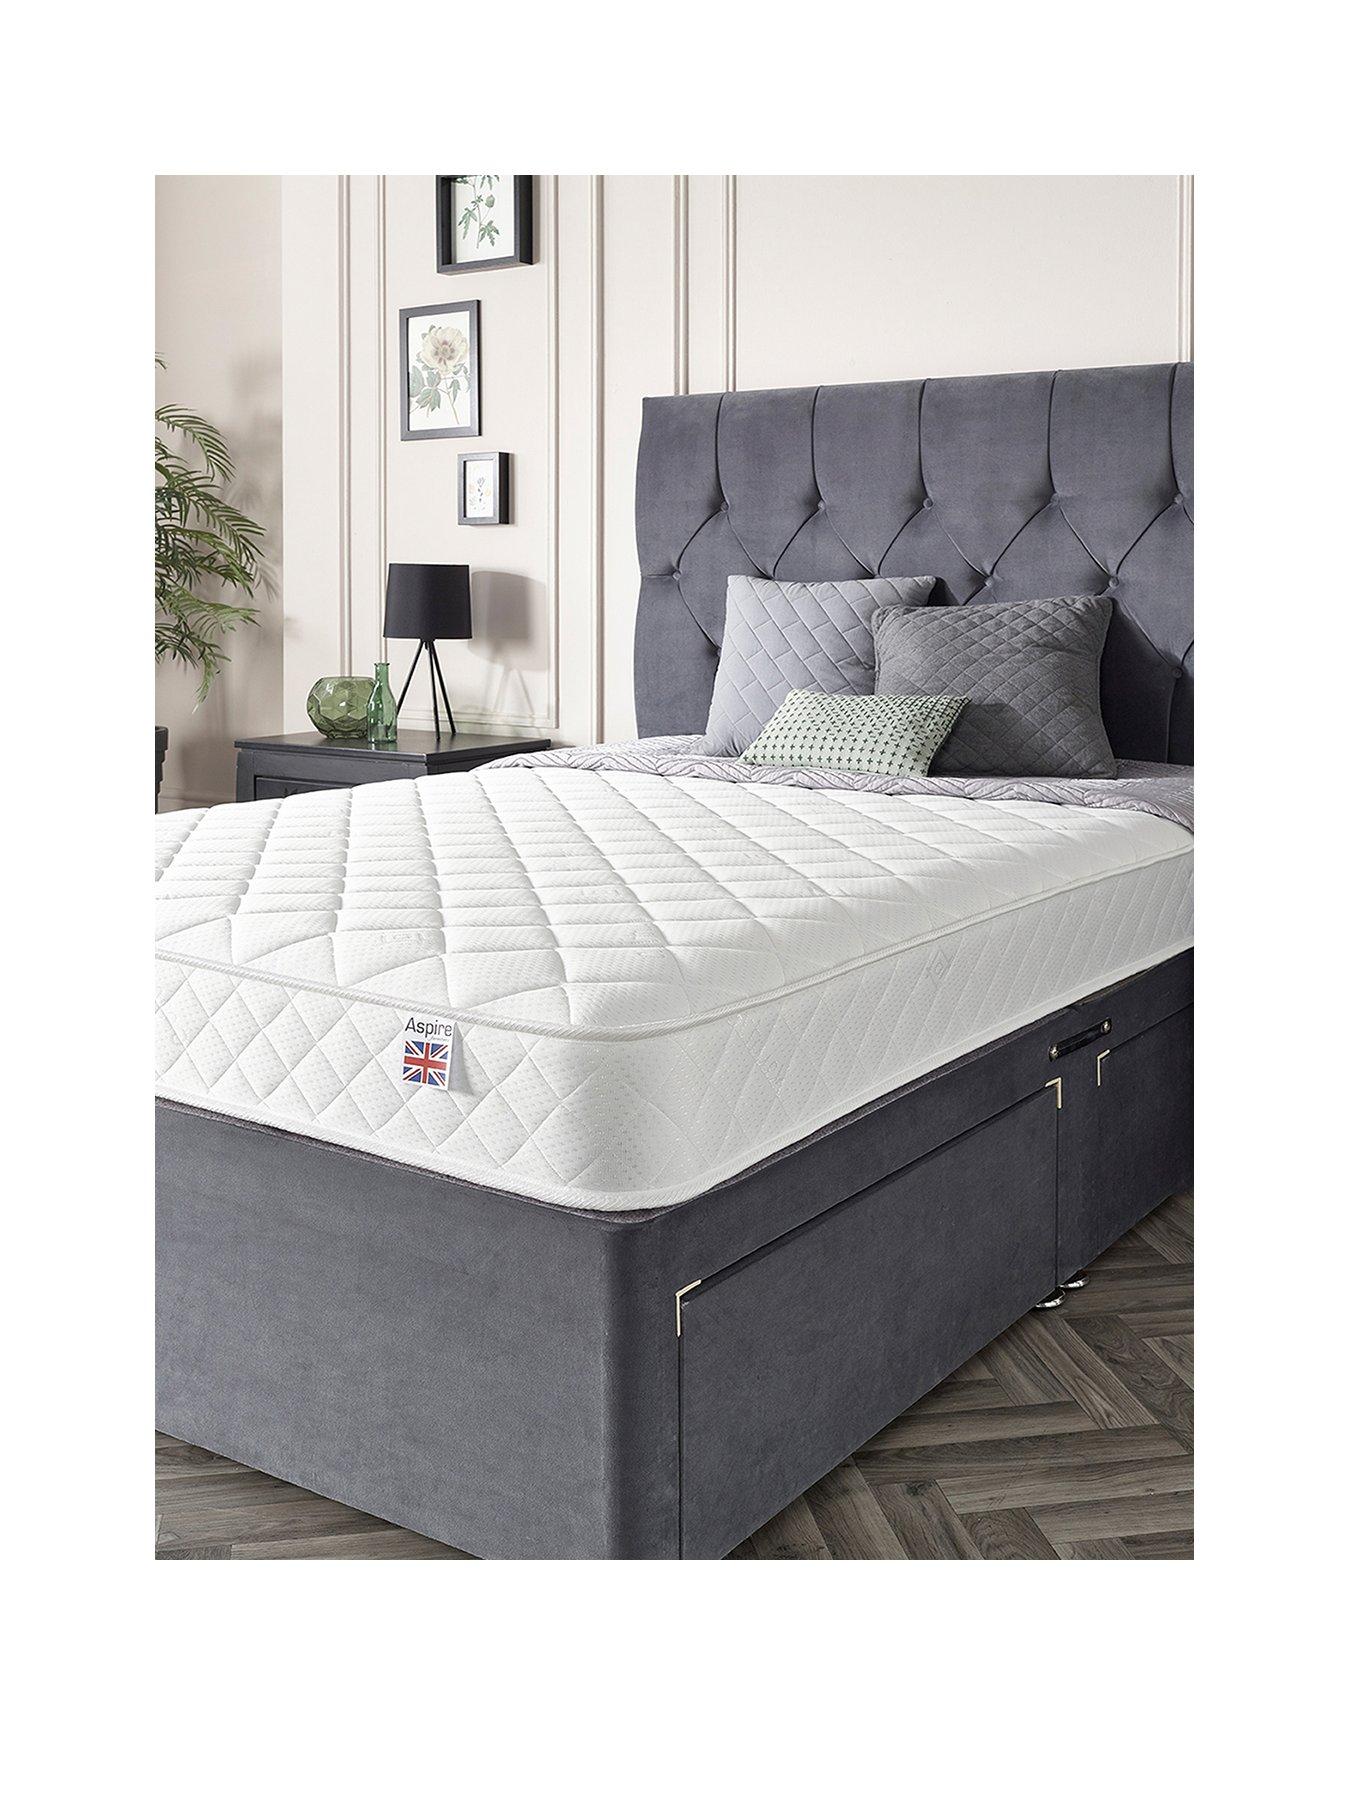 Details about   MEMORY FOAM MATTRESS ORTHOPAEDIC 3FT 4FT 5FT DOUBLE KING COVER 6" 8" 10" 12" 